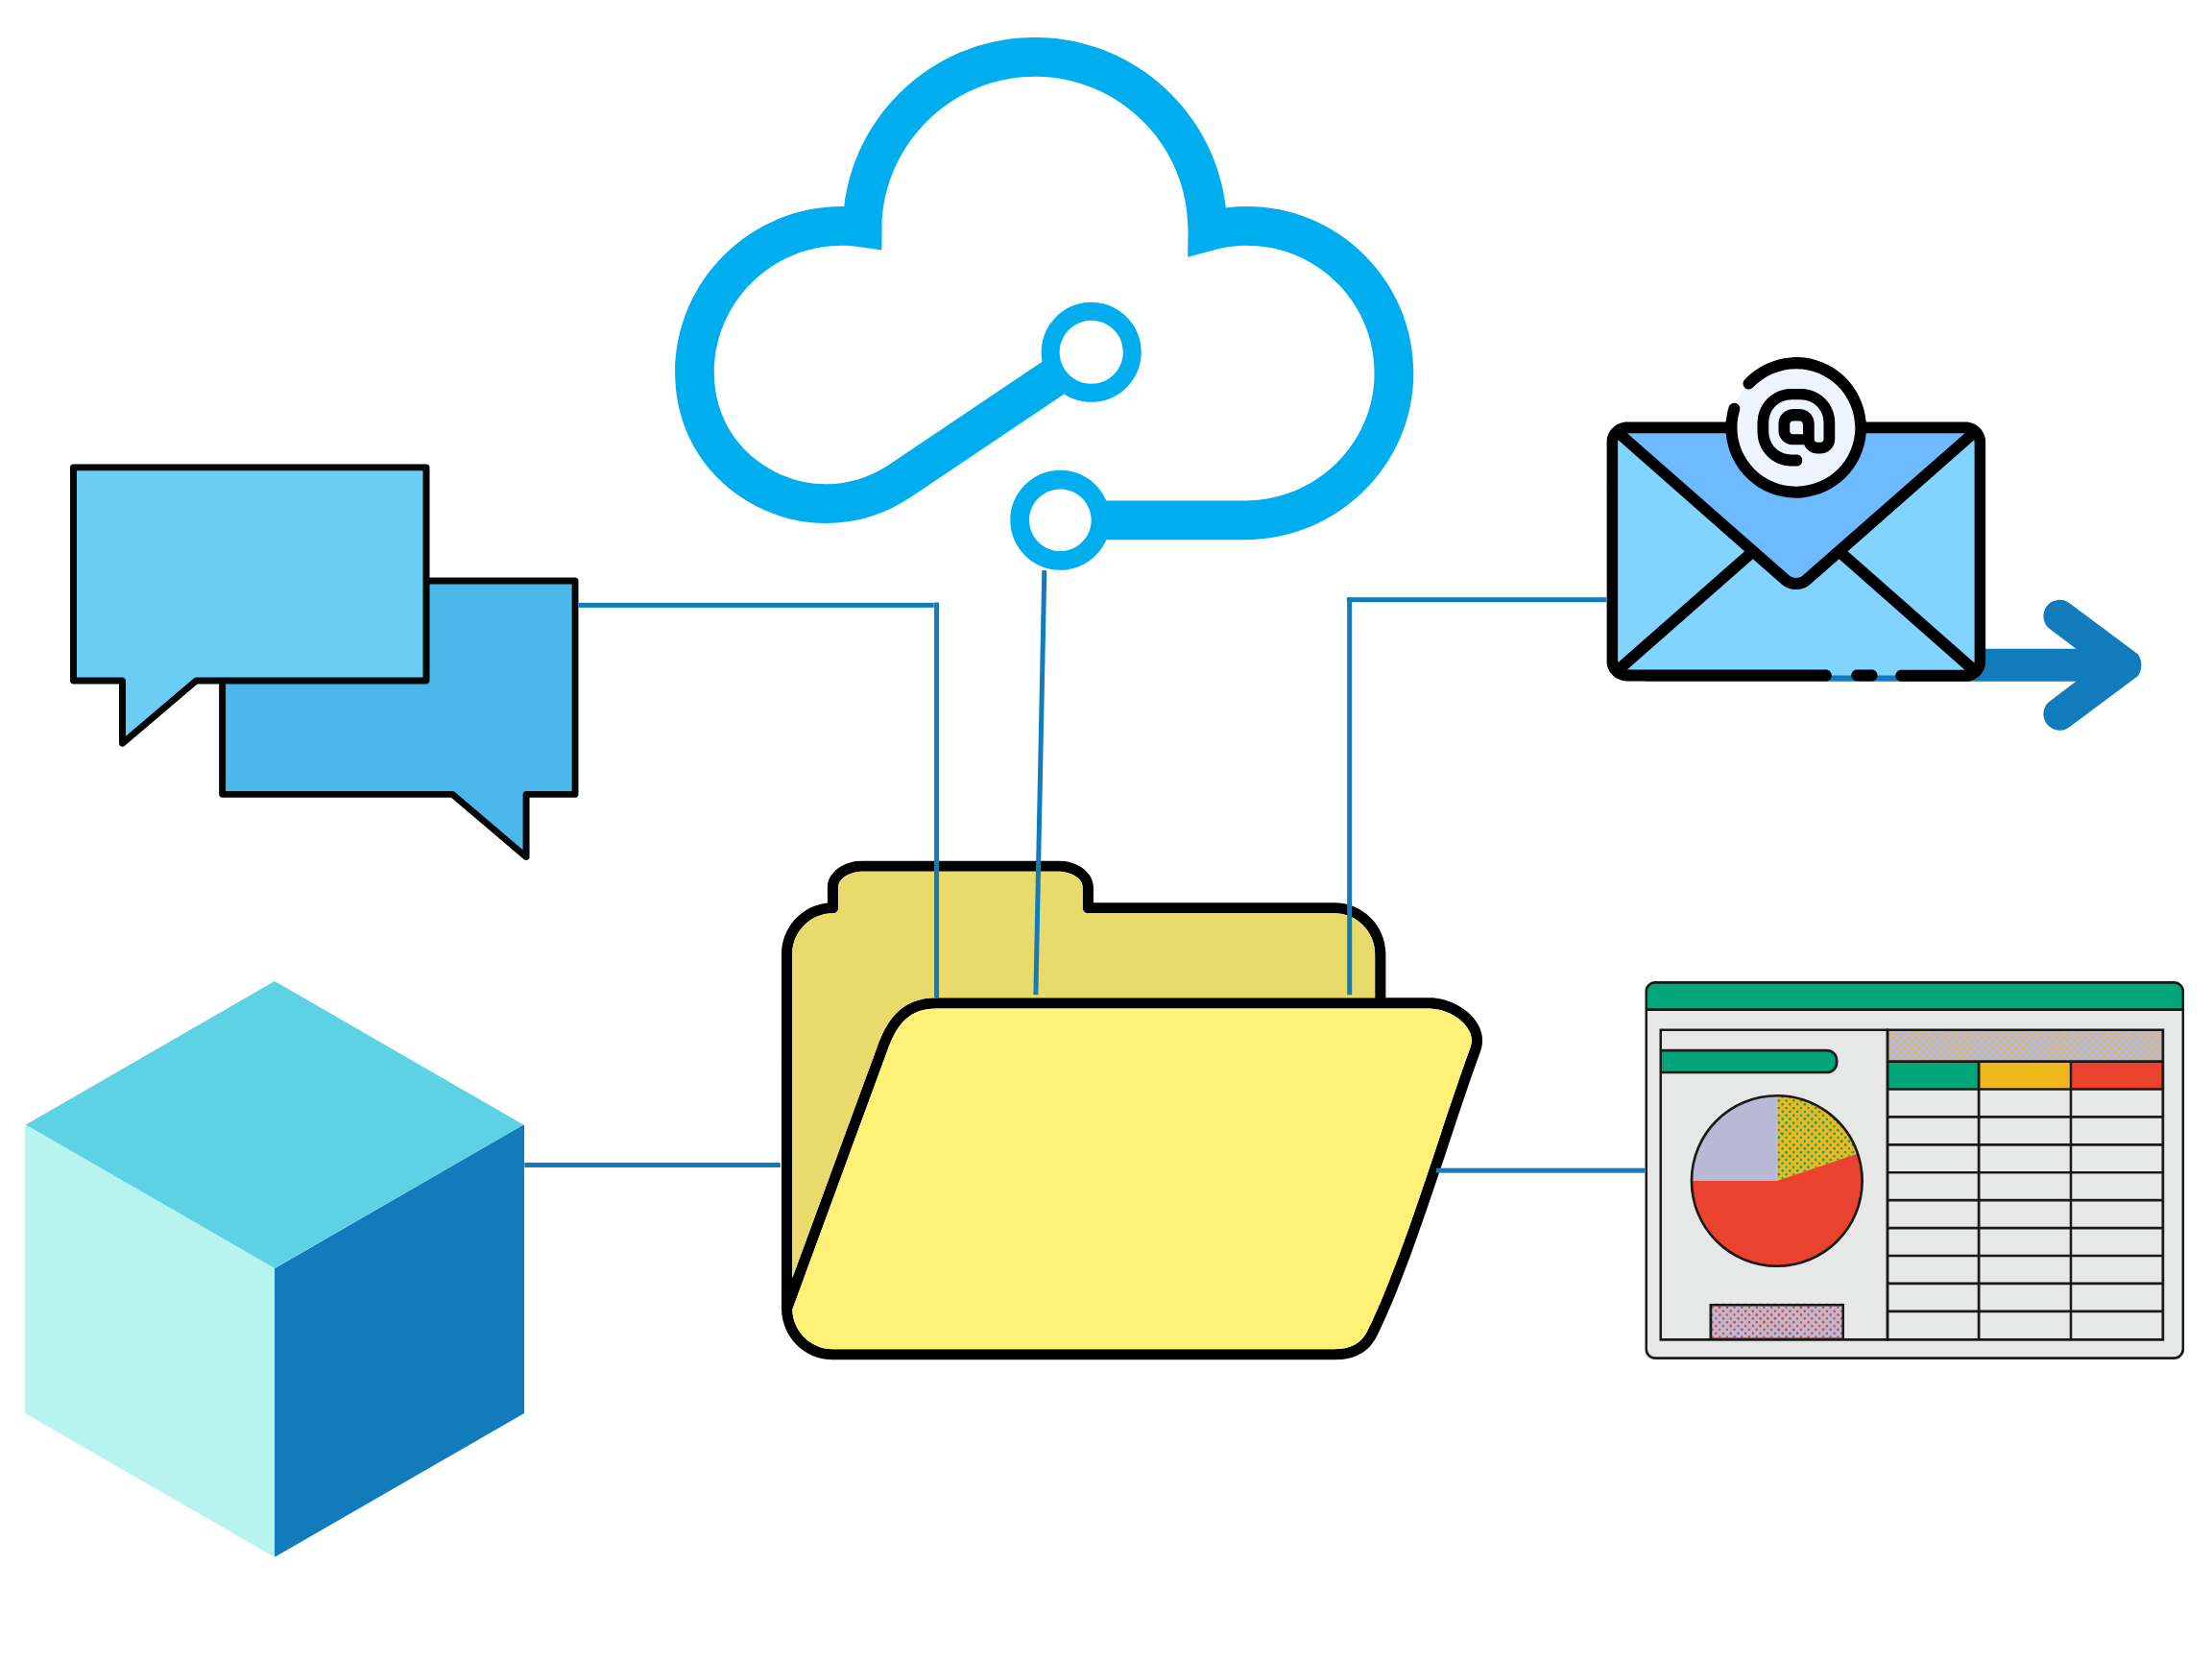 Diagram of flow with cube, comment bubble, cloud, email, and spreadsheet.